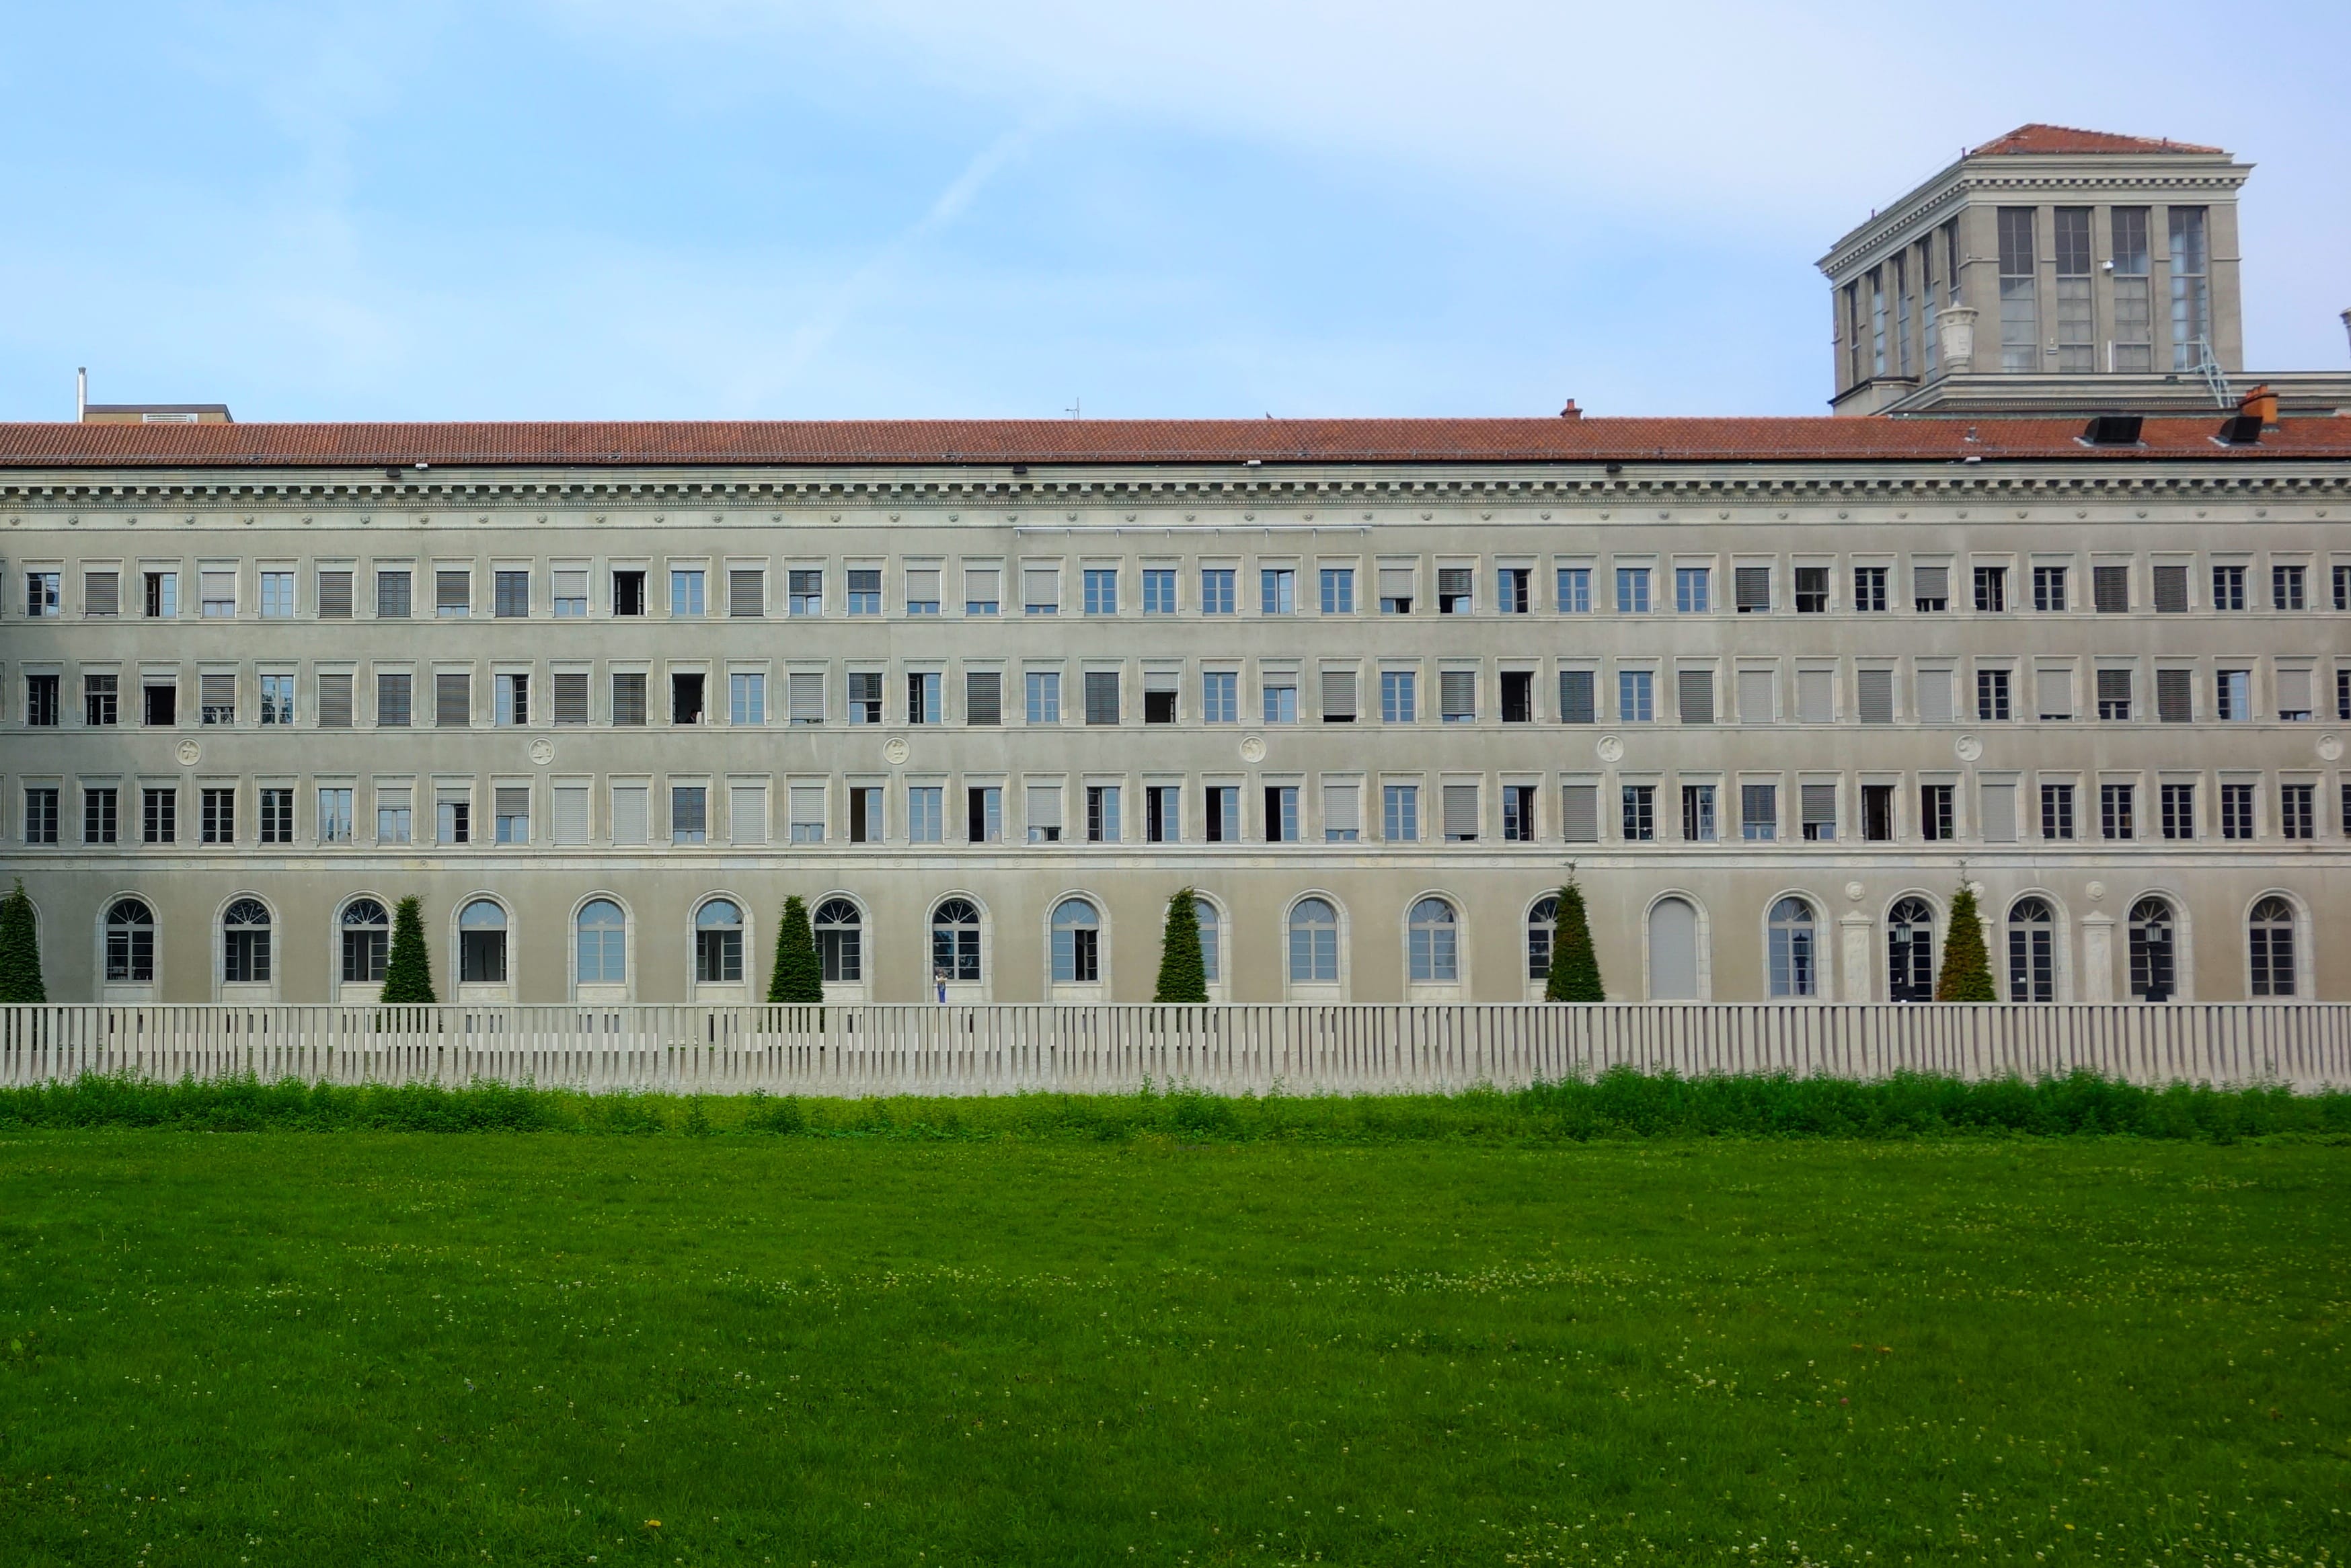 Dispute Settlement at the WTO – A Renovation Case?